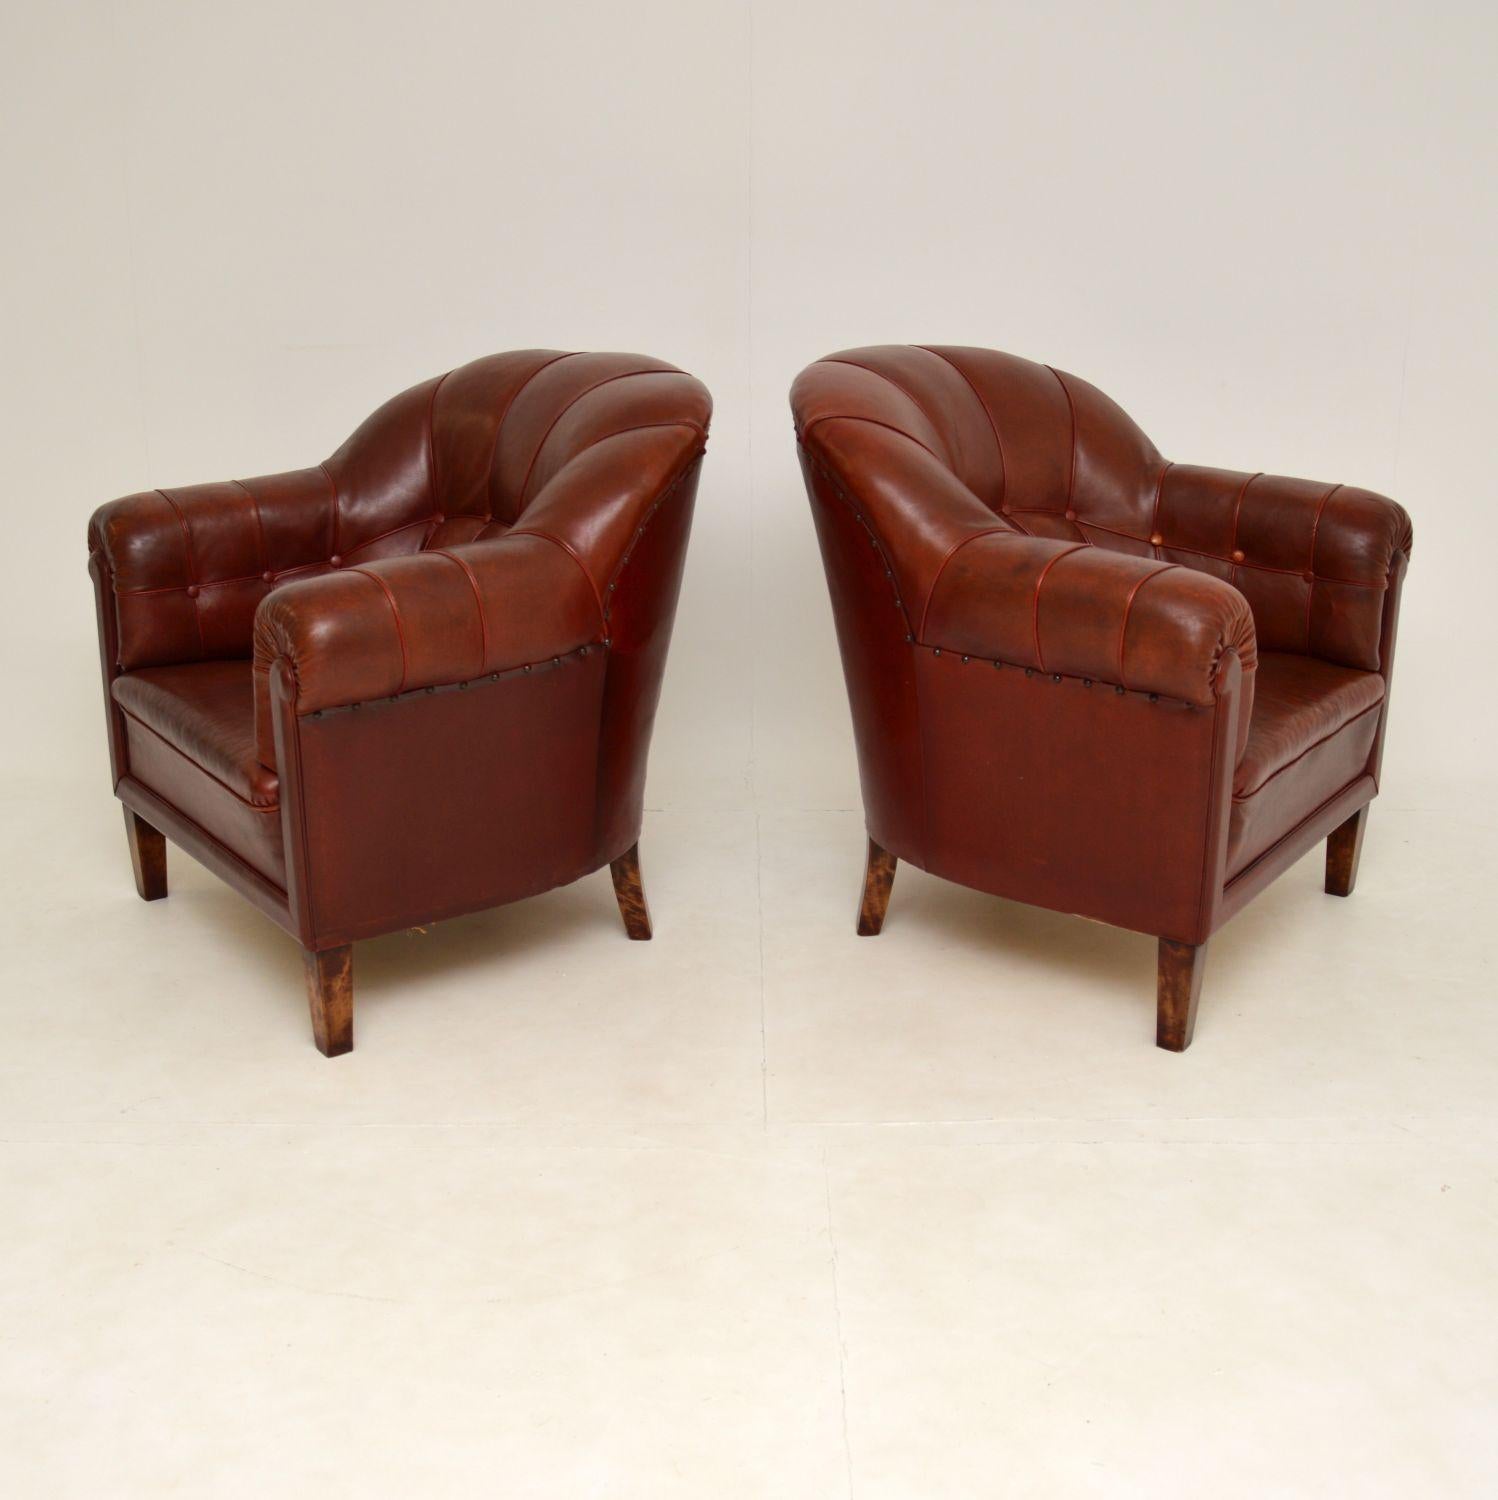 20th Century Pair of Antique Swedish Leather Club Armchairs